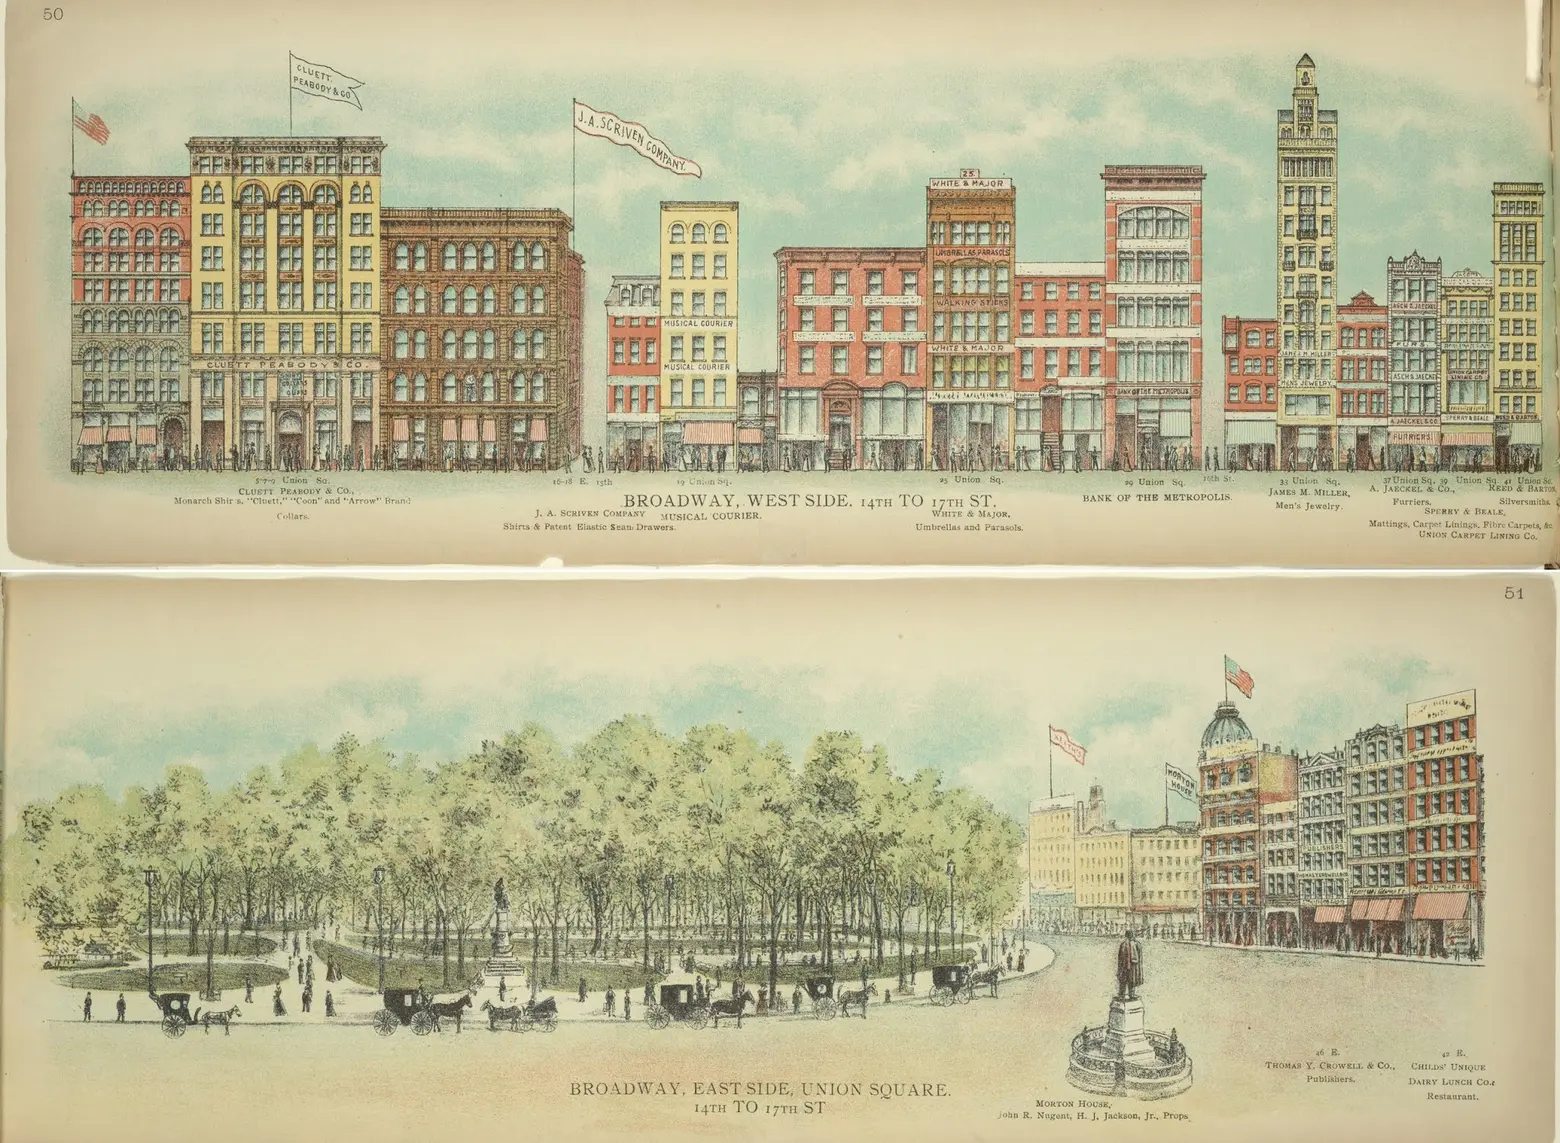 This block-by-block drawing shows Broadway in 1899